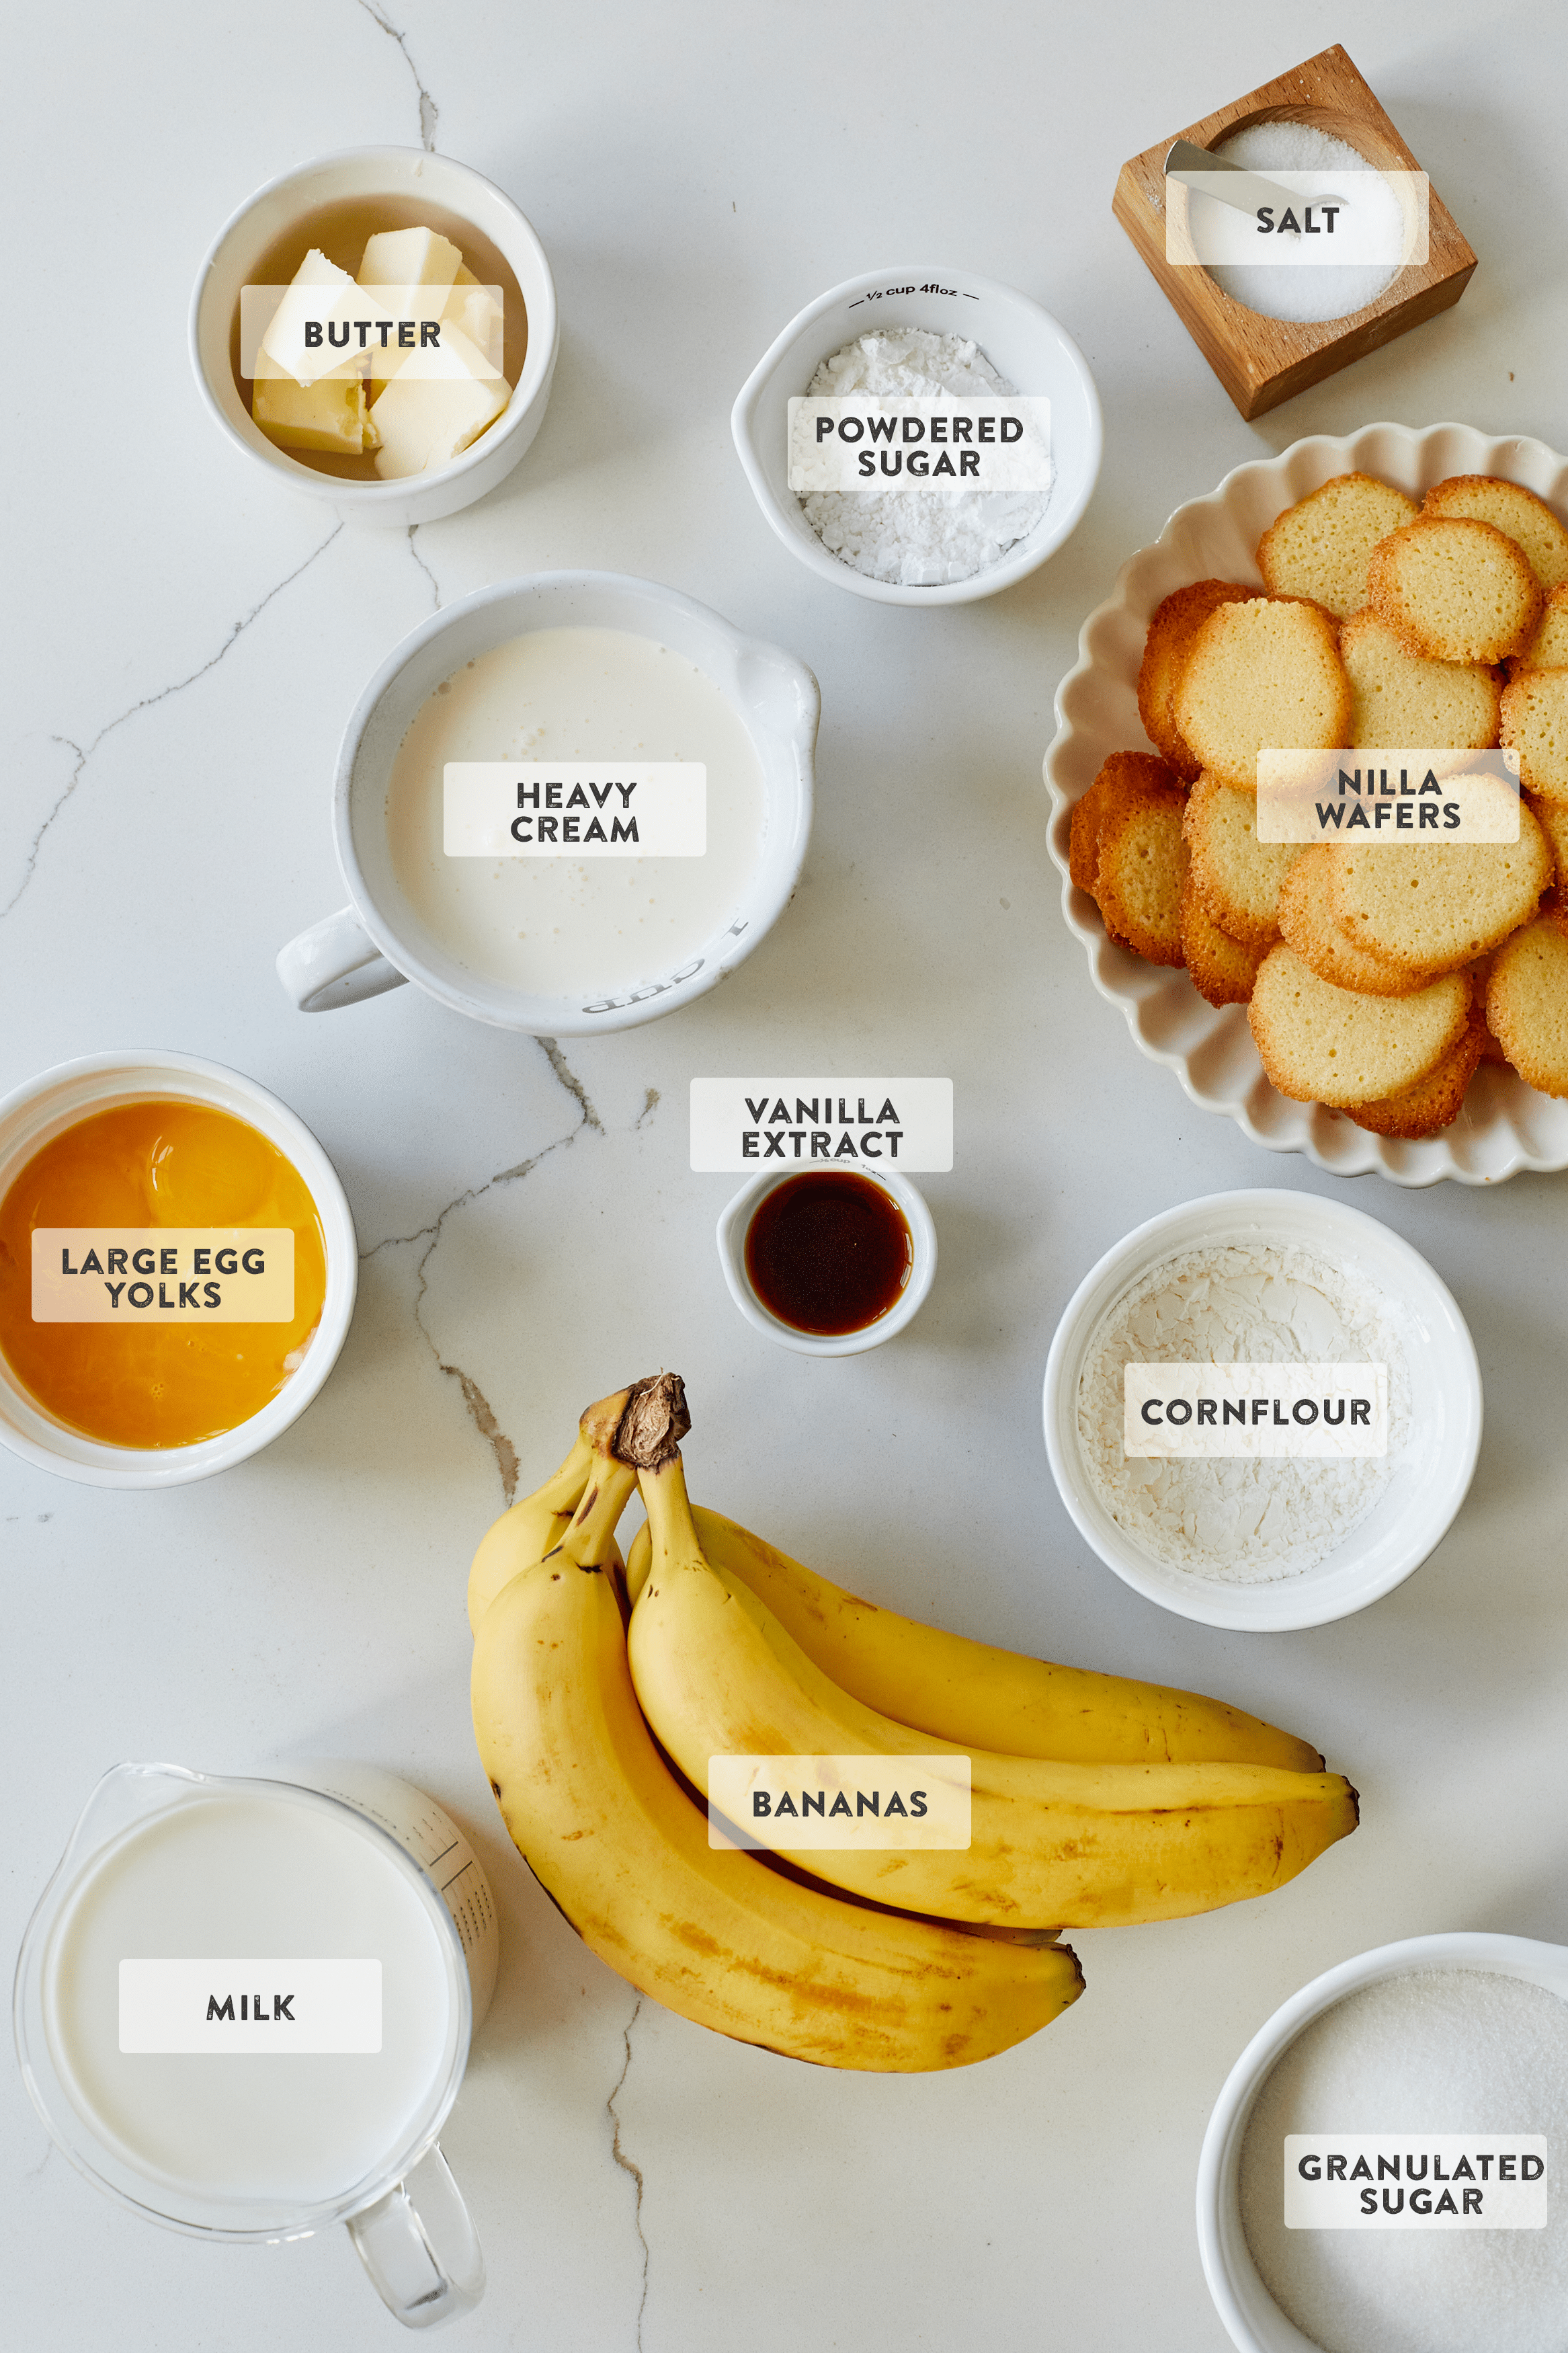 Ingredients for 10-Minute Microwave Banana Pudding